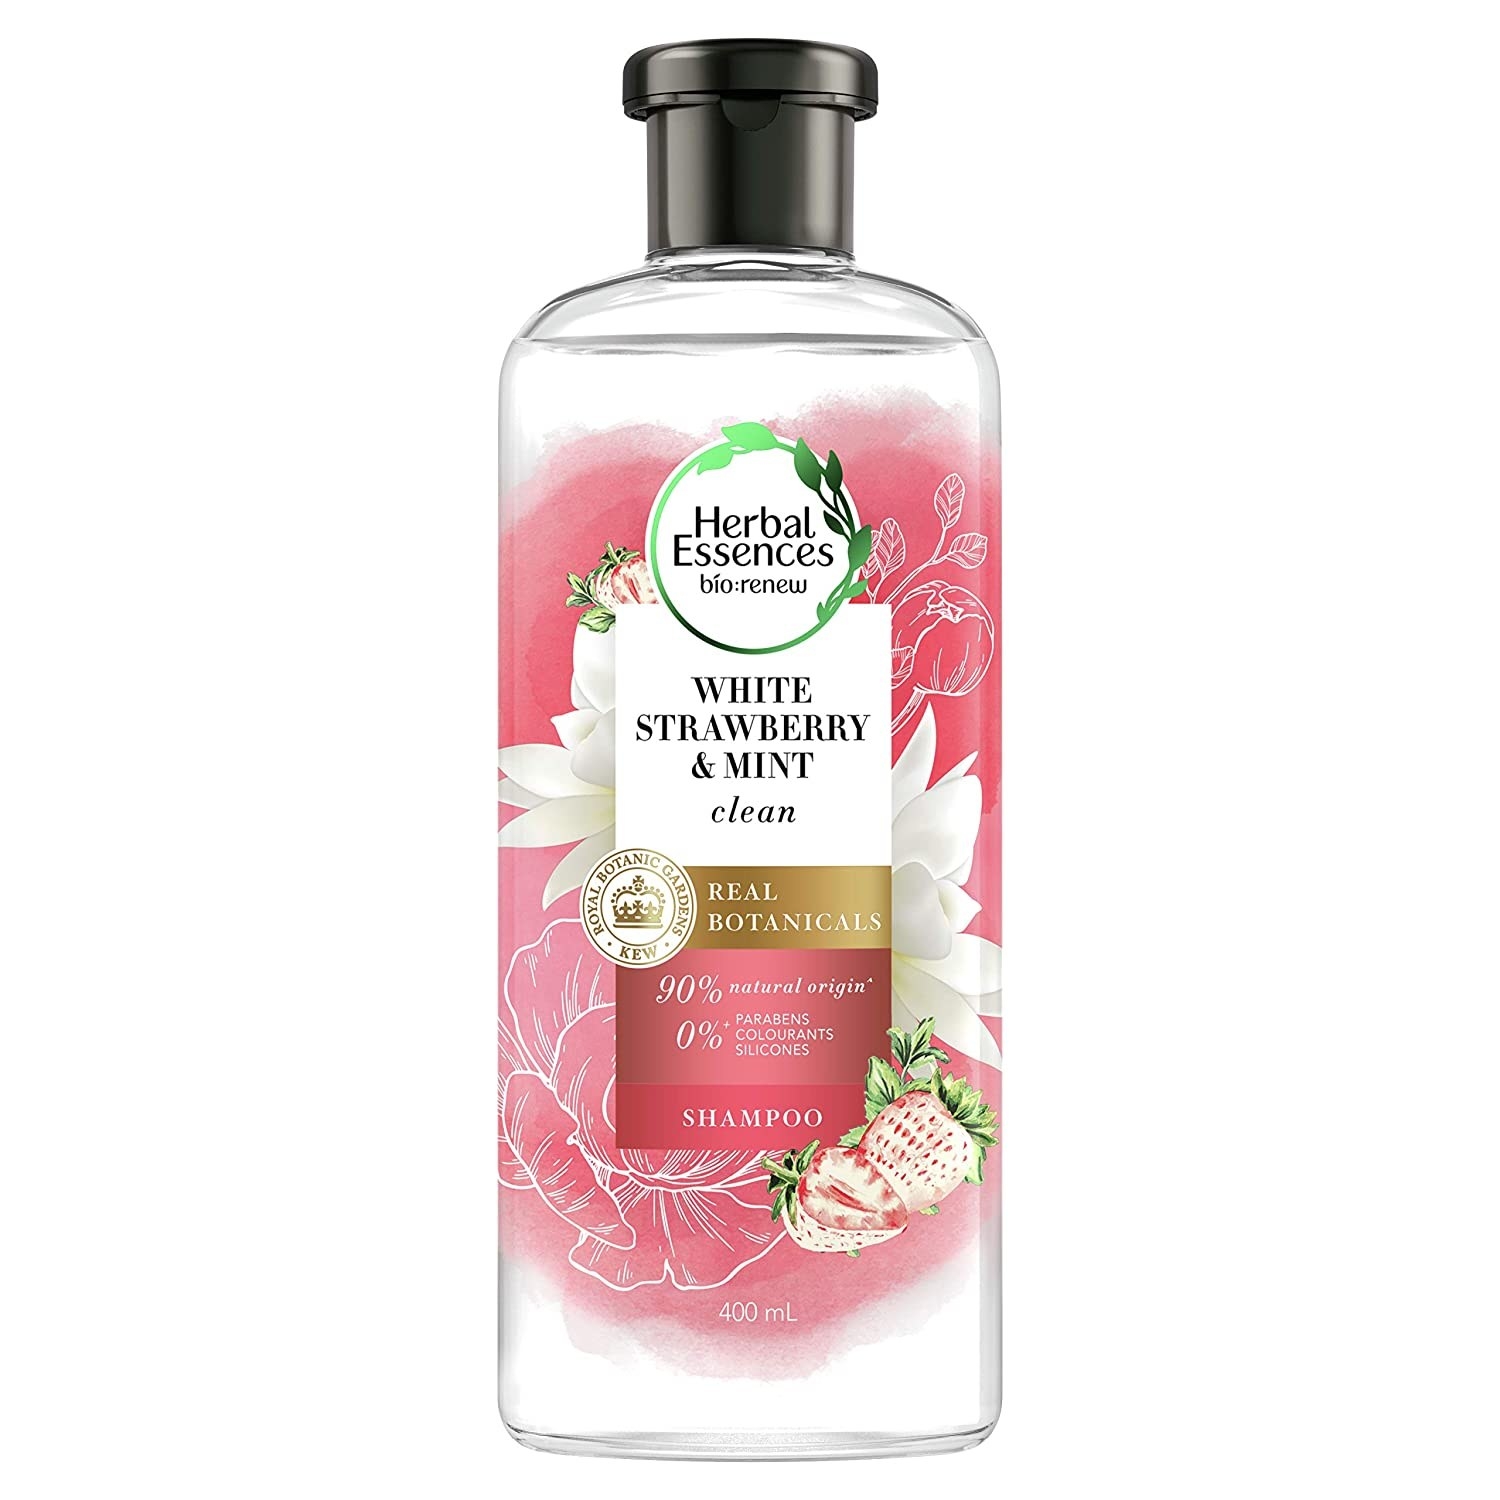 A strawberry and sweet mint scented shampoo 